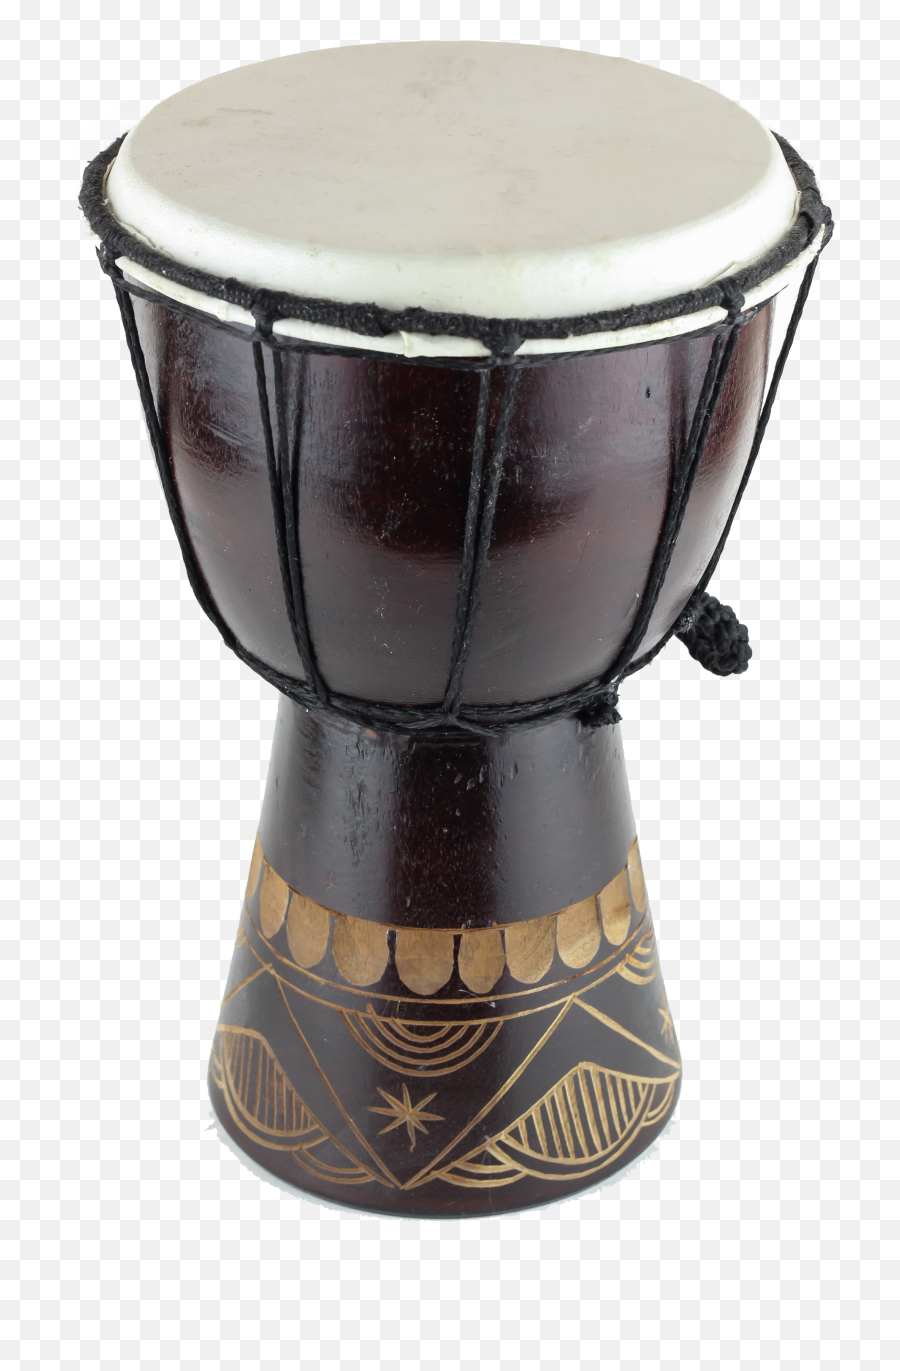 African Drum Png Image For Free Download - Transparent African Drums Png,Drum Png